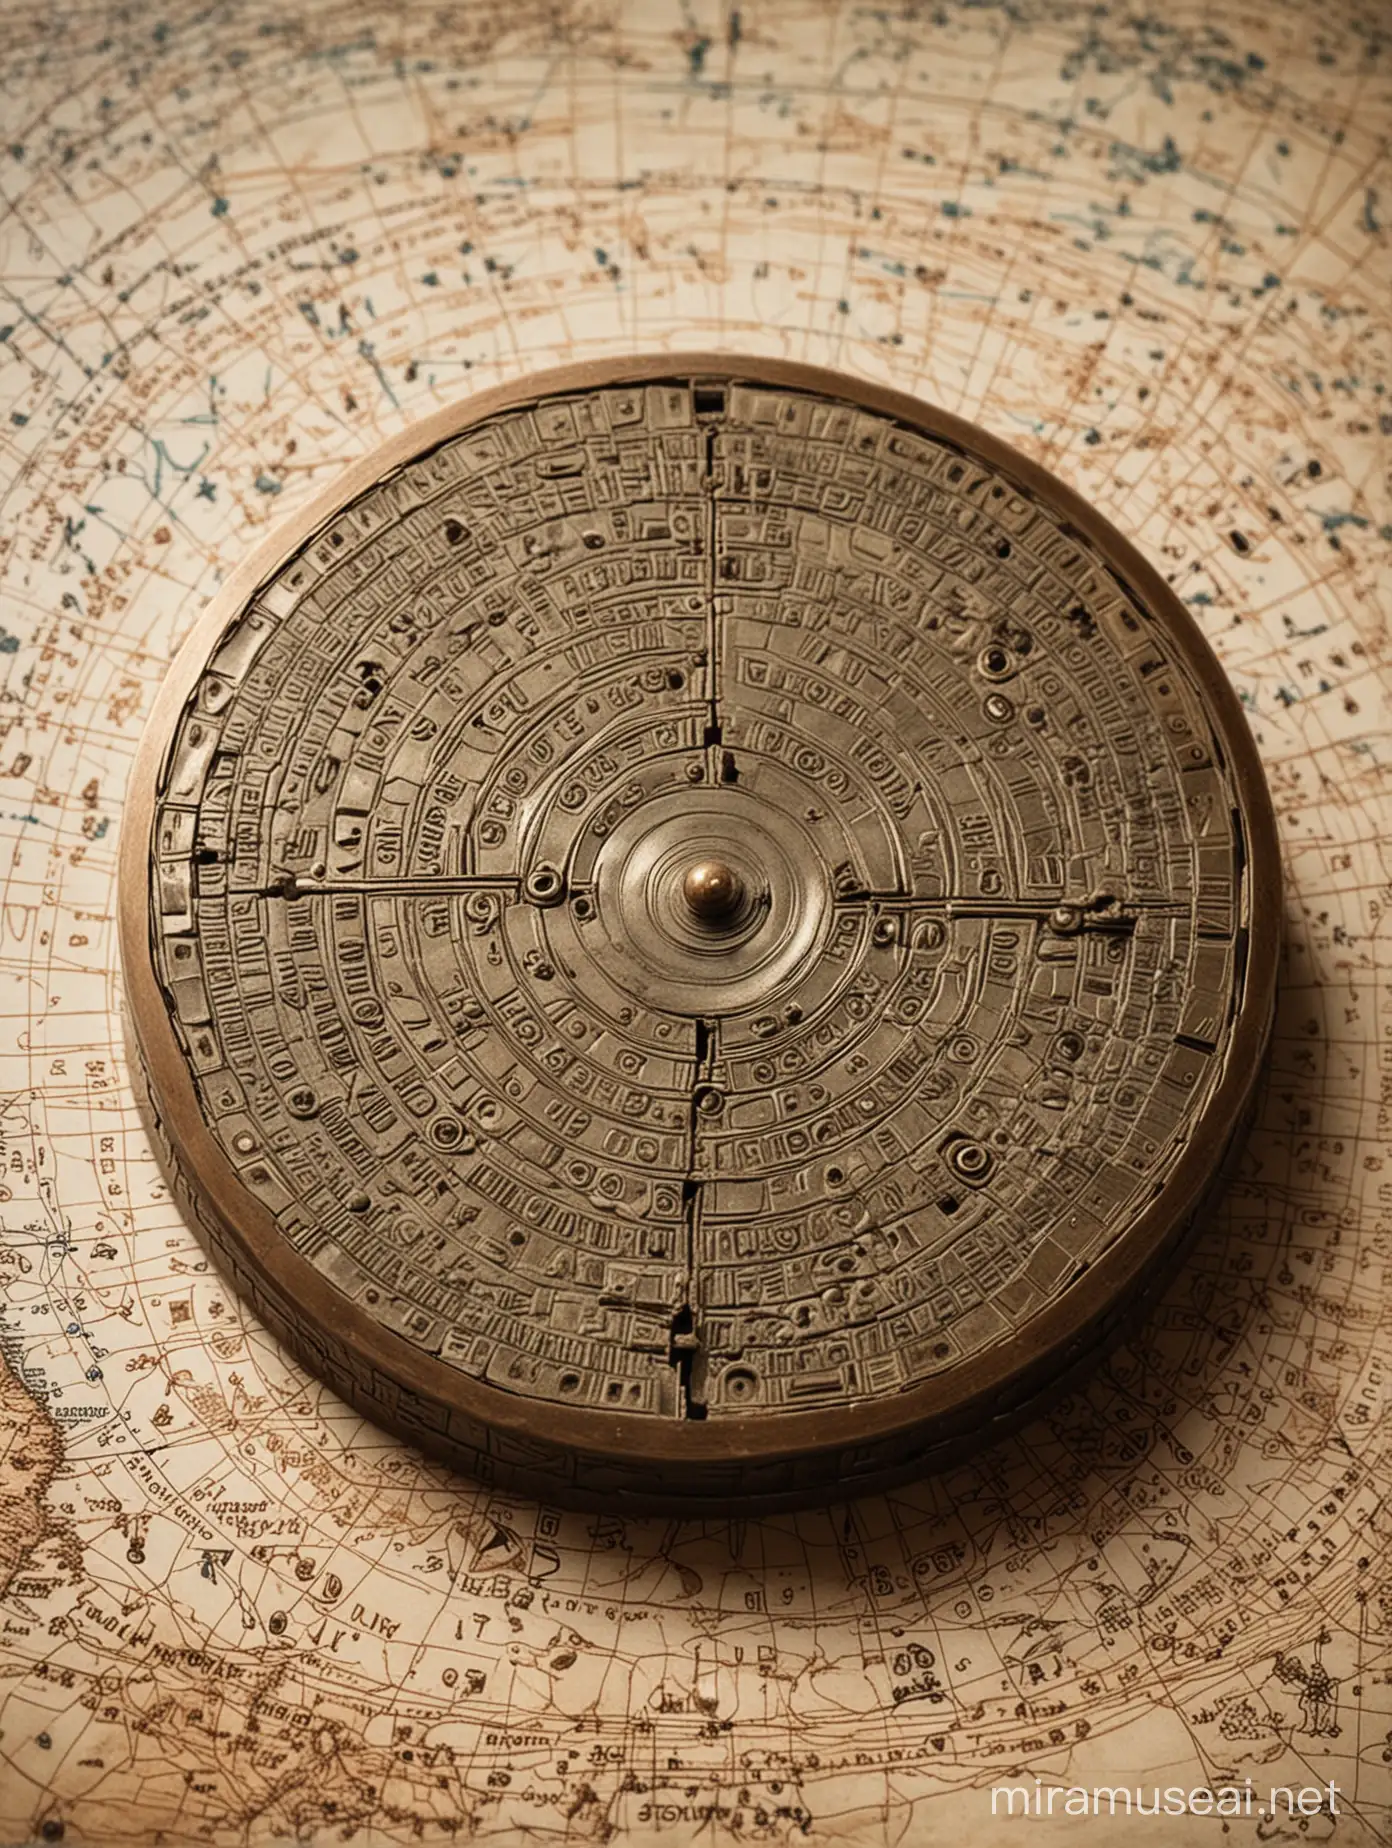 a small ancient metallic bronze decoder-dial disk artifact with four rotating concentric rings, dusty, on a desk covered with oceanic maps and cartographic charts